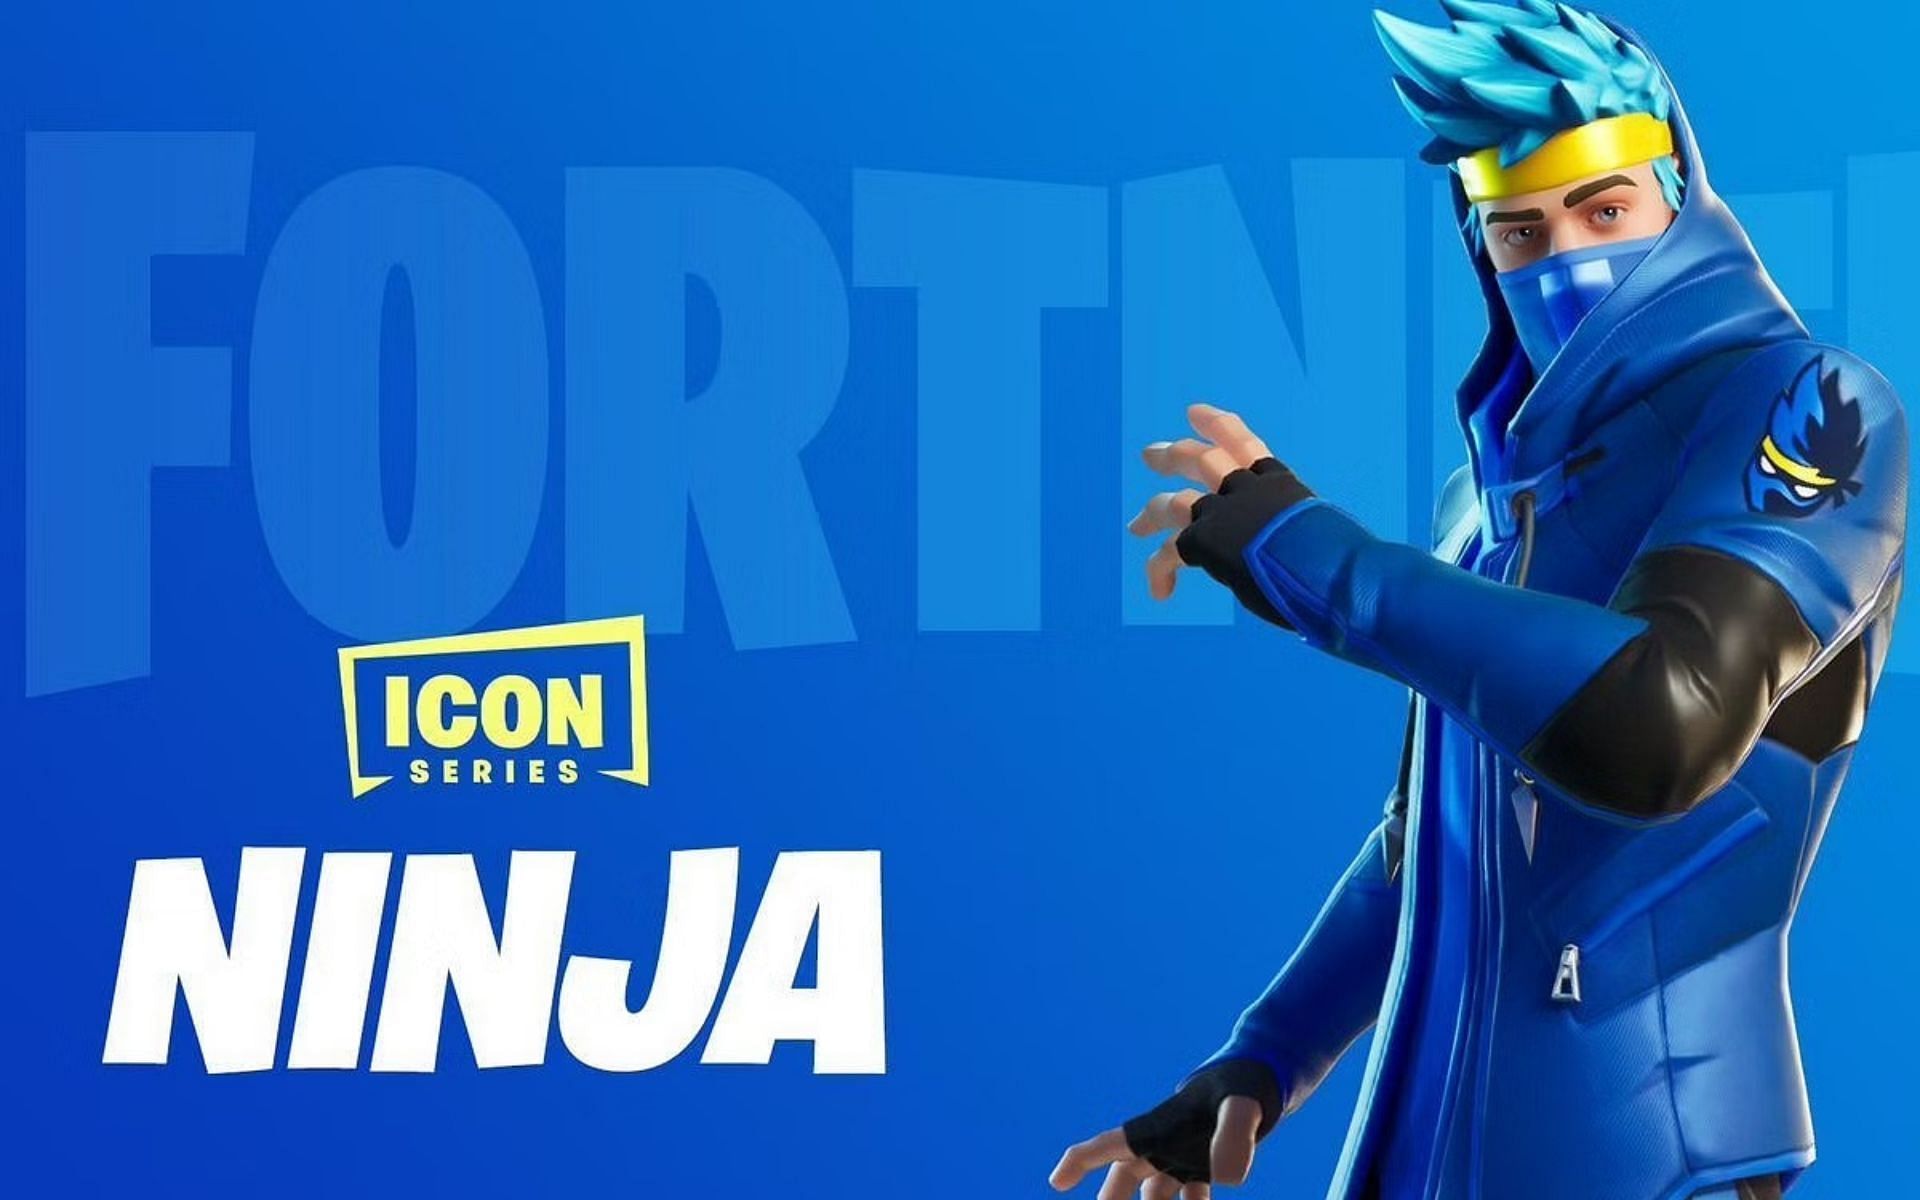 Ninja was extremely popular, yet not even he could not avoid a Fortnite ban (Image via Epic Games)